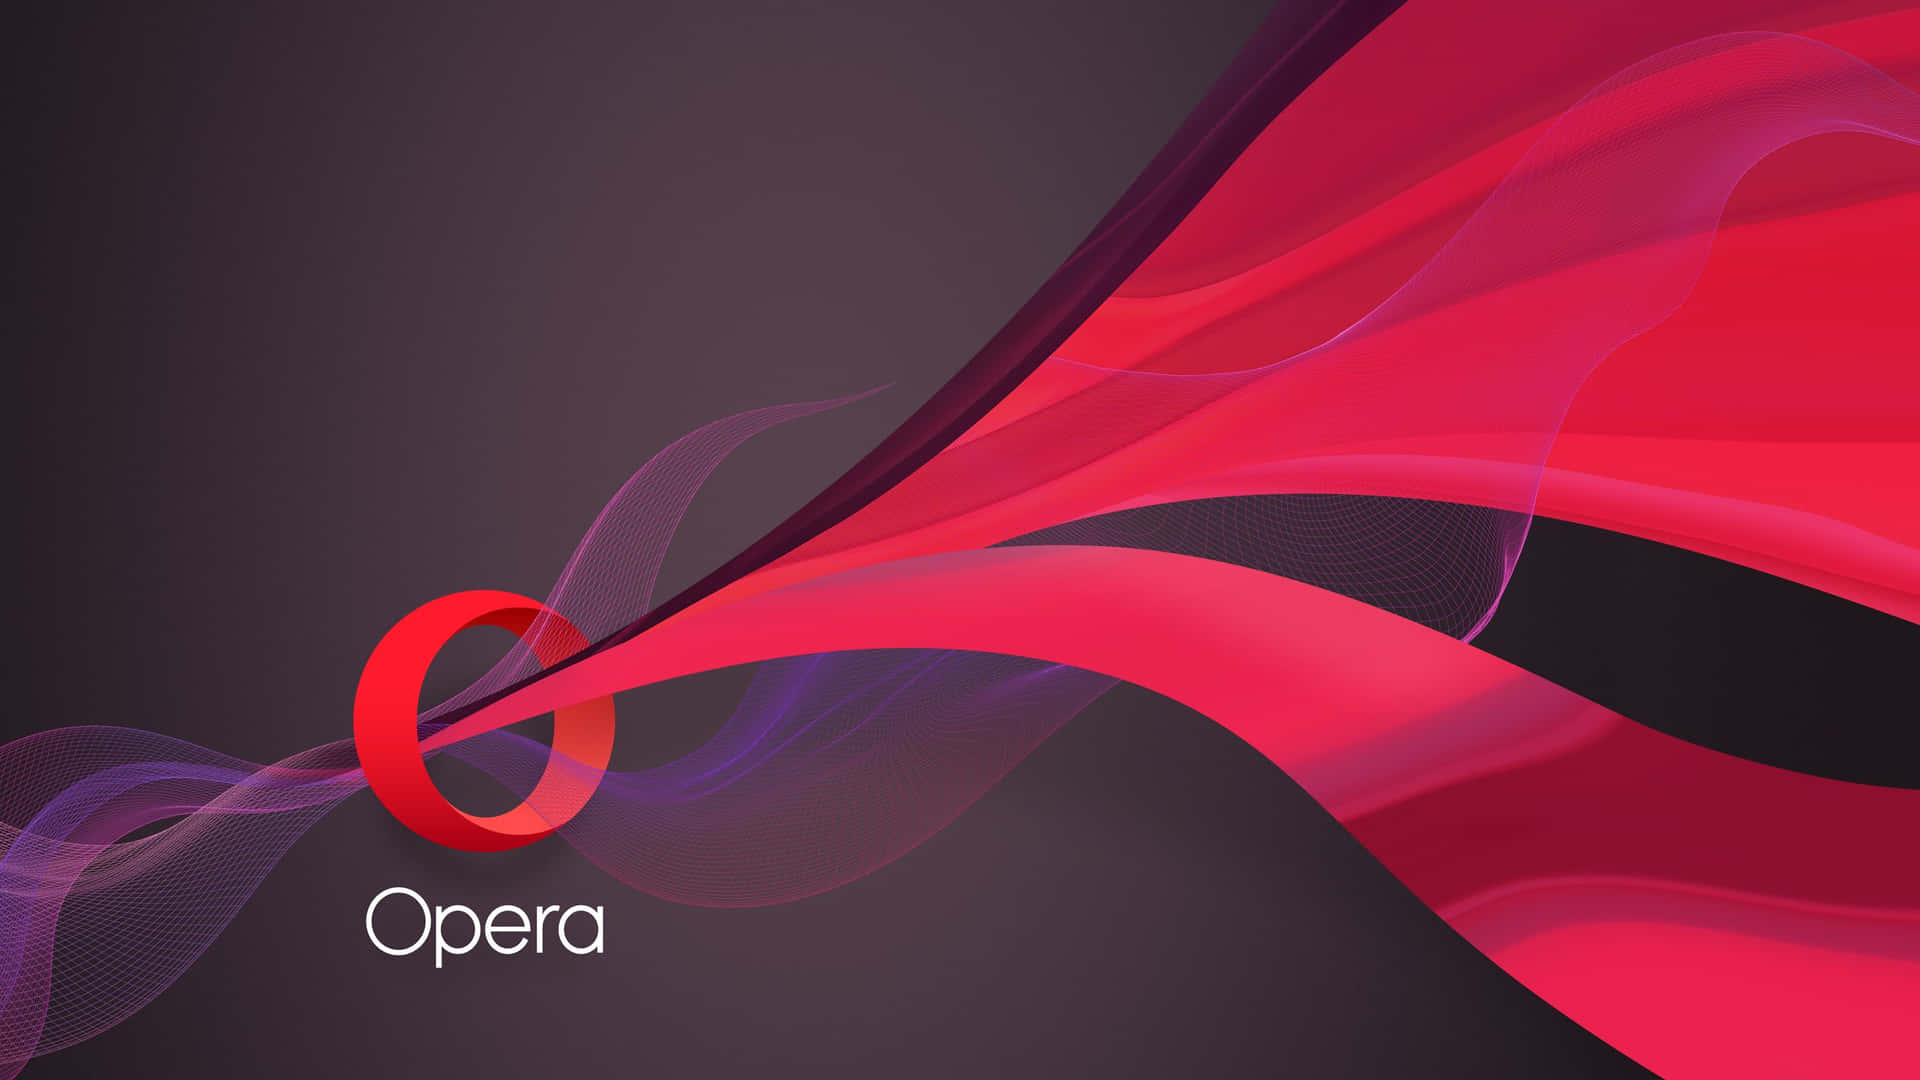 Opera GX unlocks mini games in your browser with Live Wallpapers - Blog